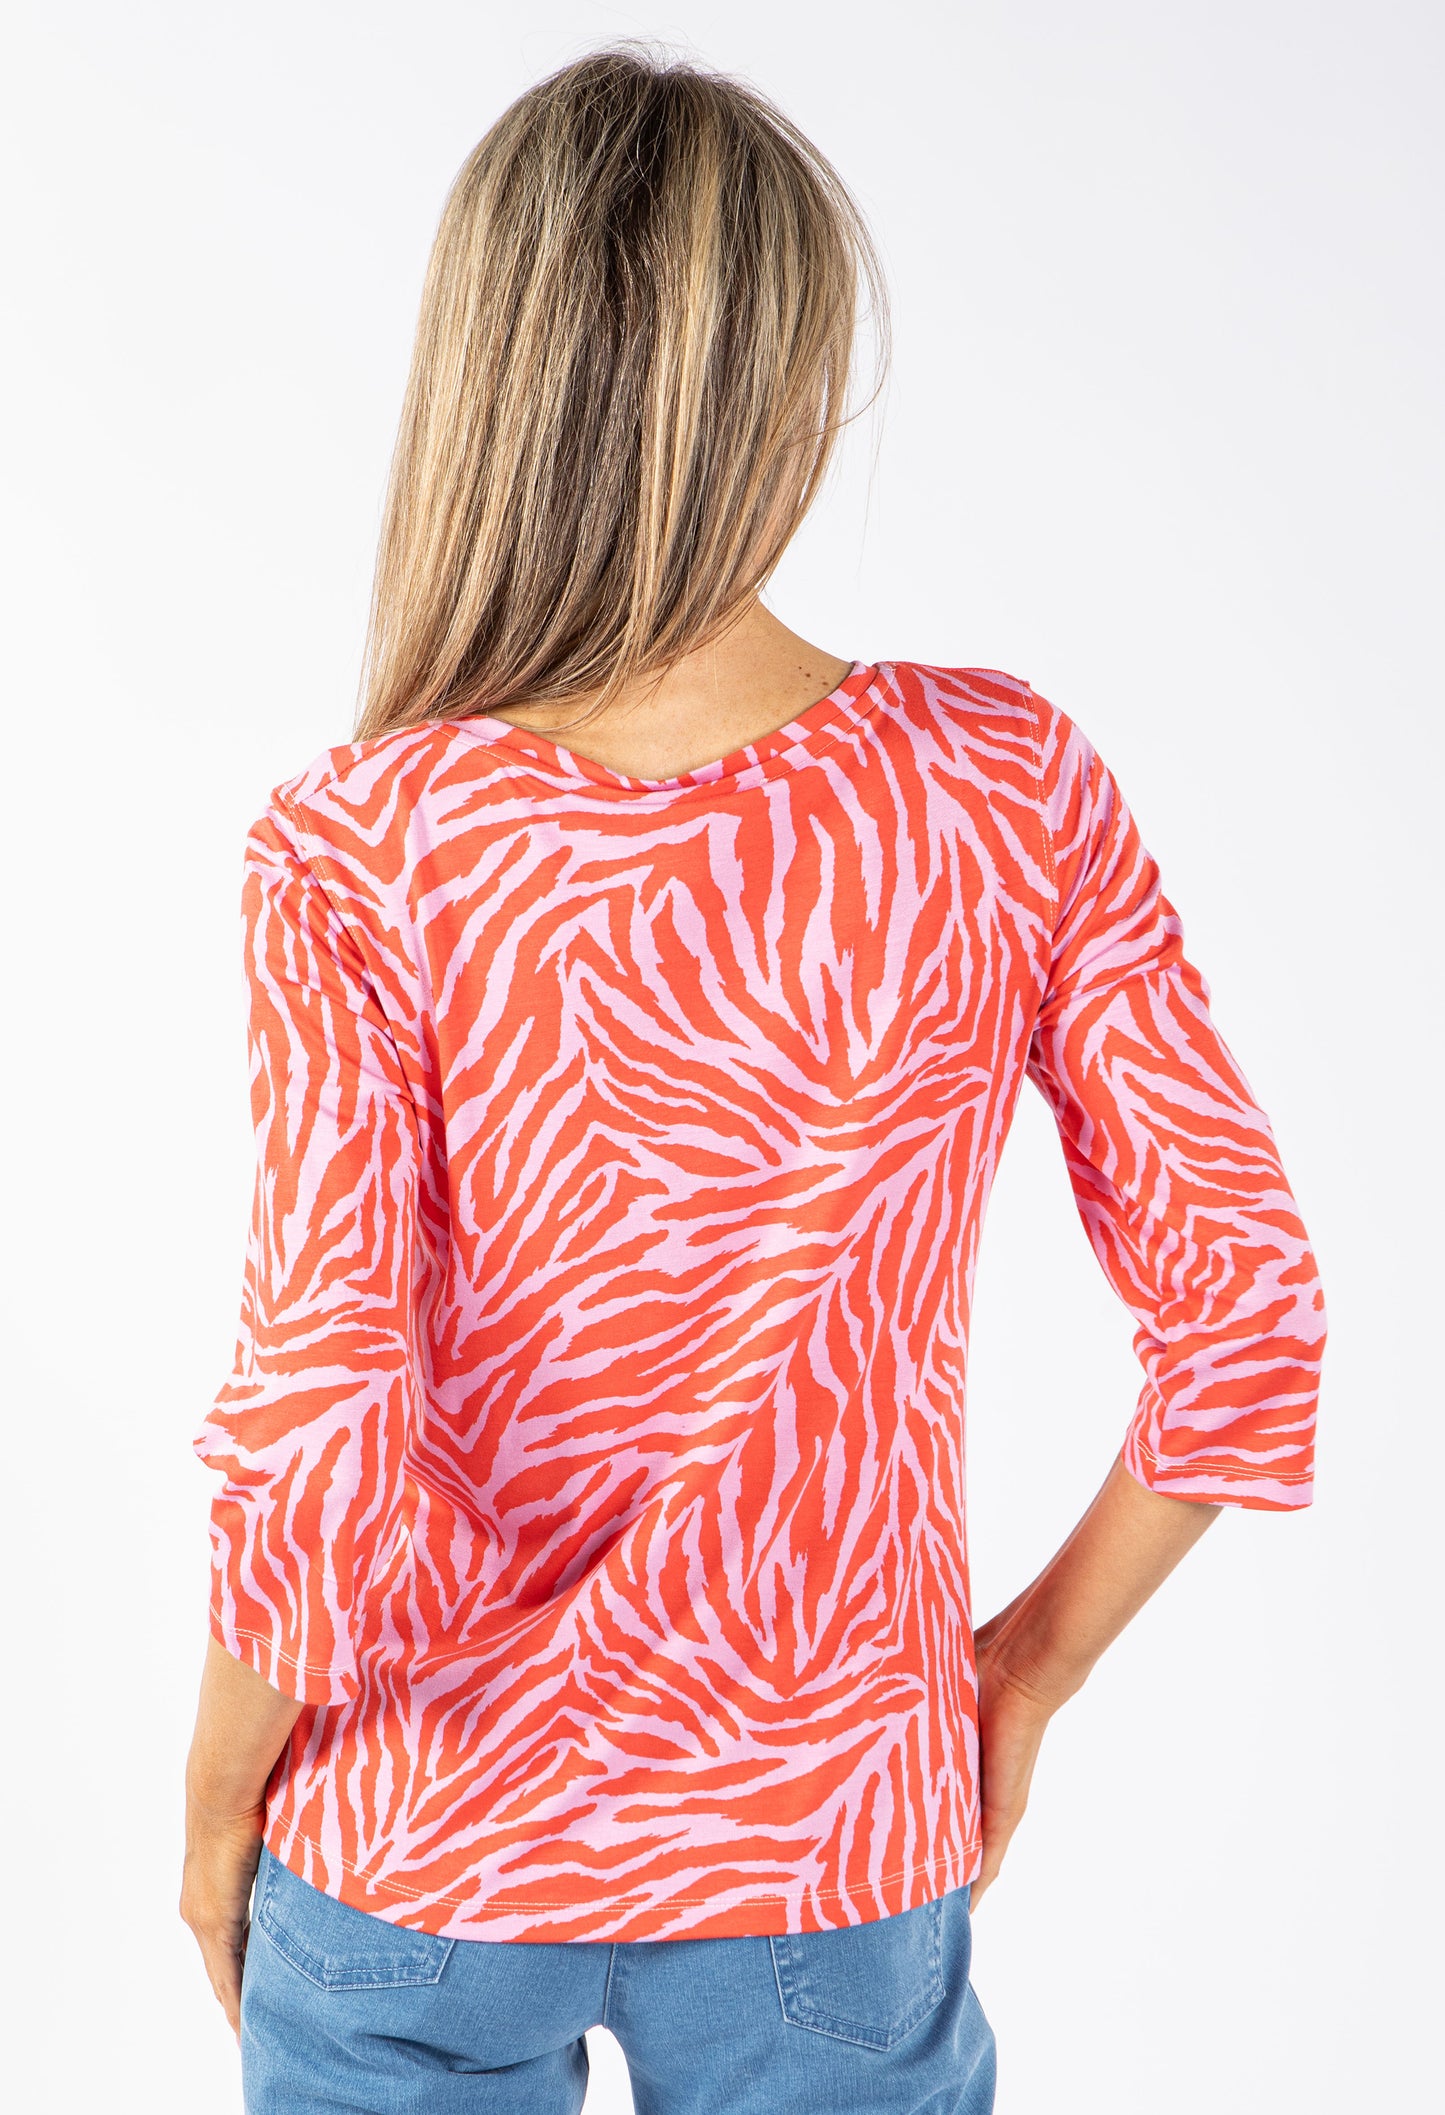 Pink and Red Tiger Striped Top